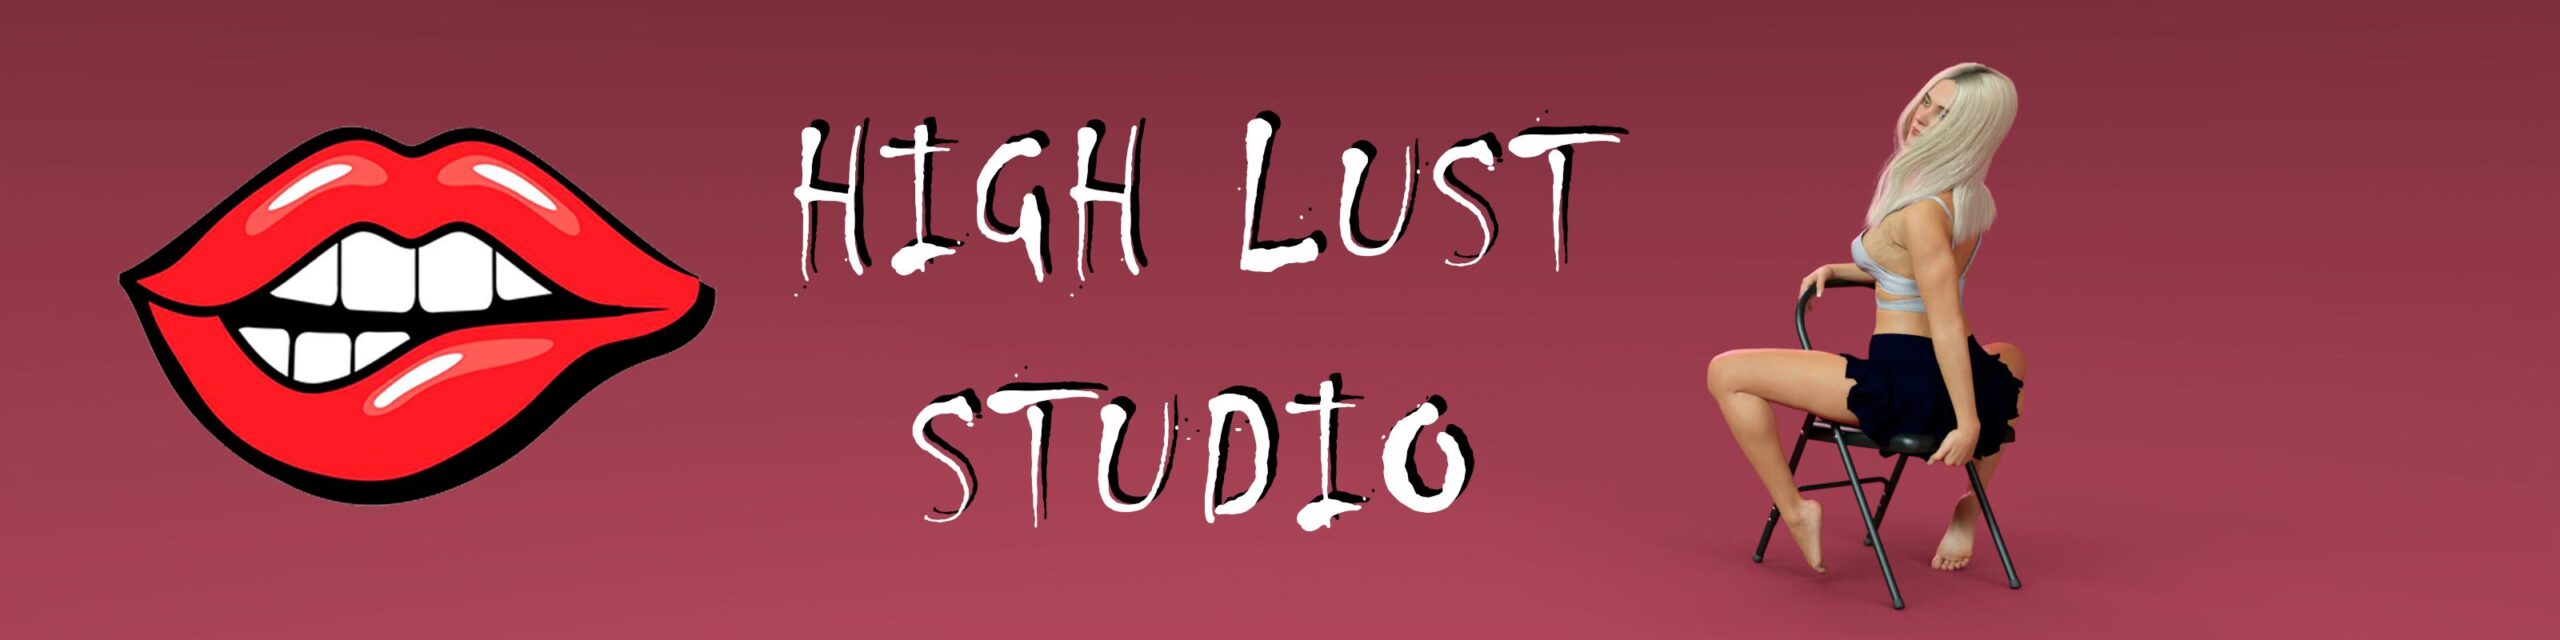 Booty call [High Lust Studio] Adult xxx Game Download